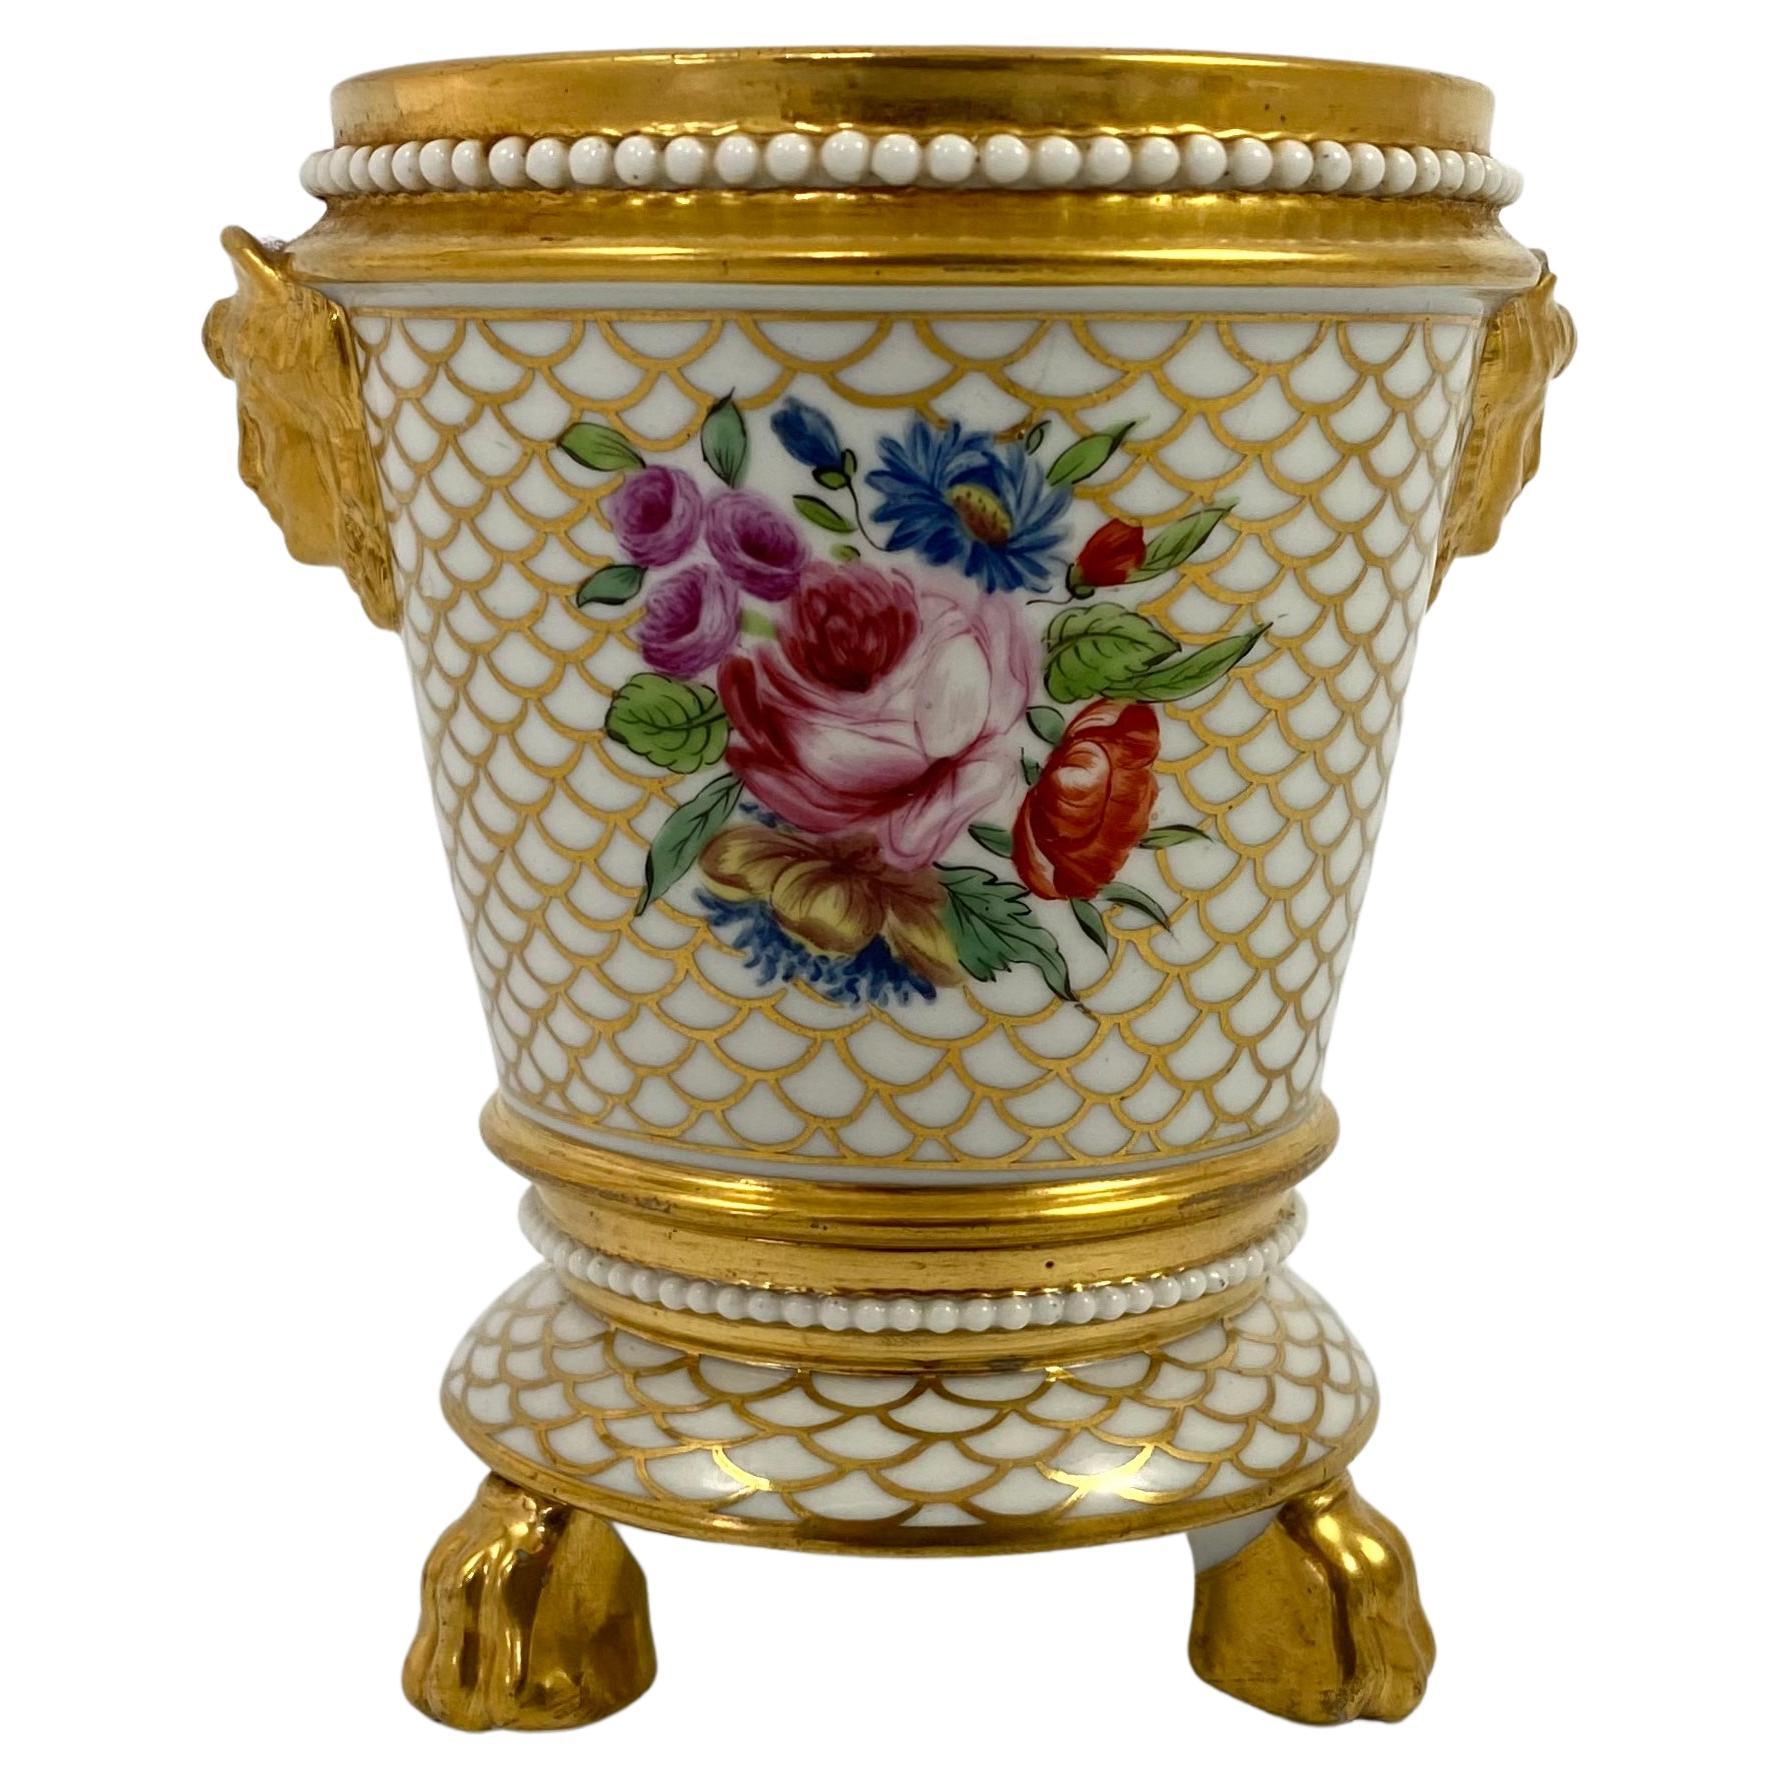 English Porcelain Cache Pot and Cover, c. 1820